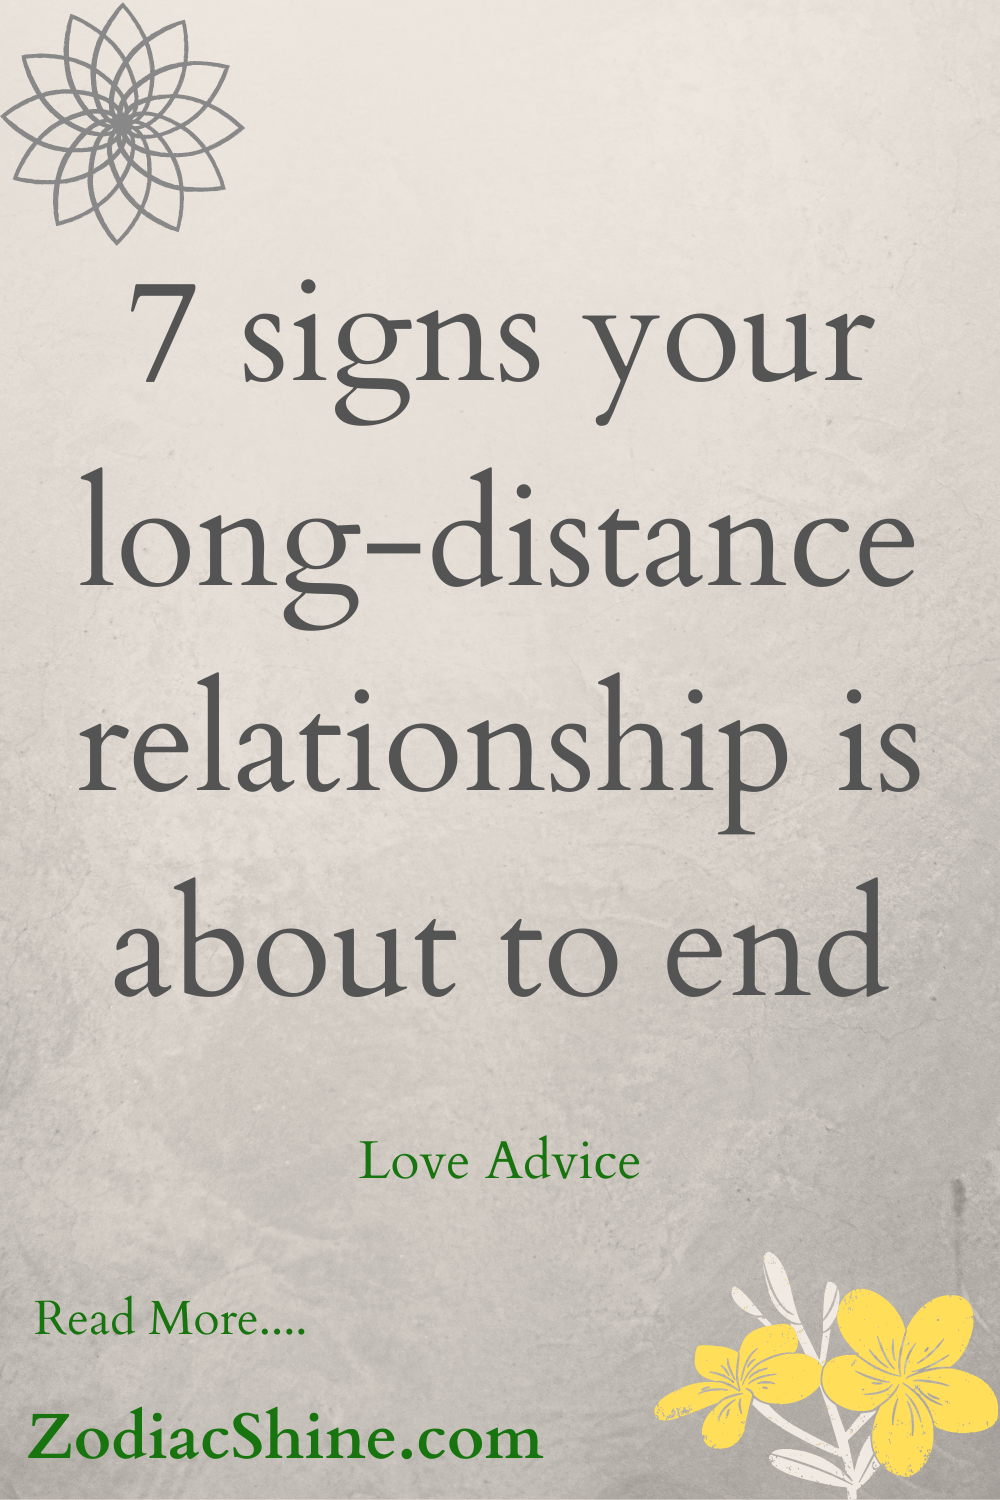 7 signs your long-distance relationship is about to end